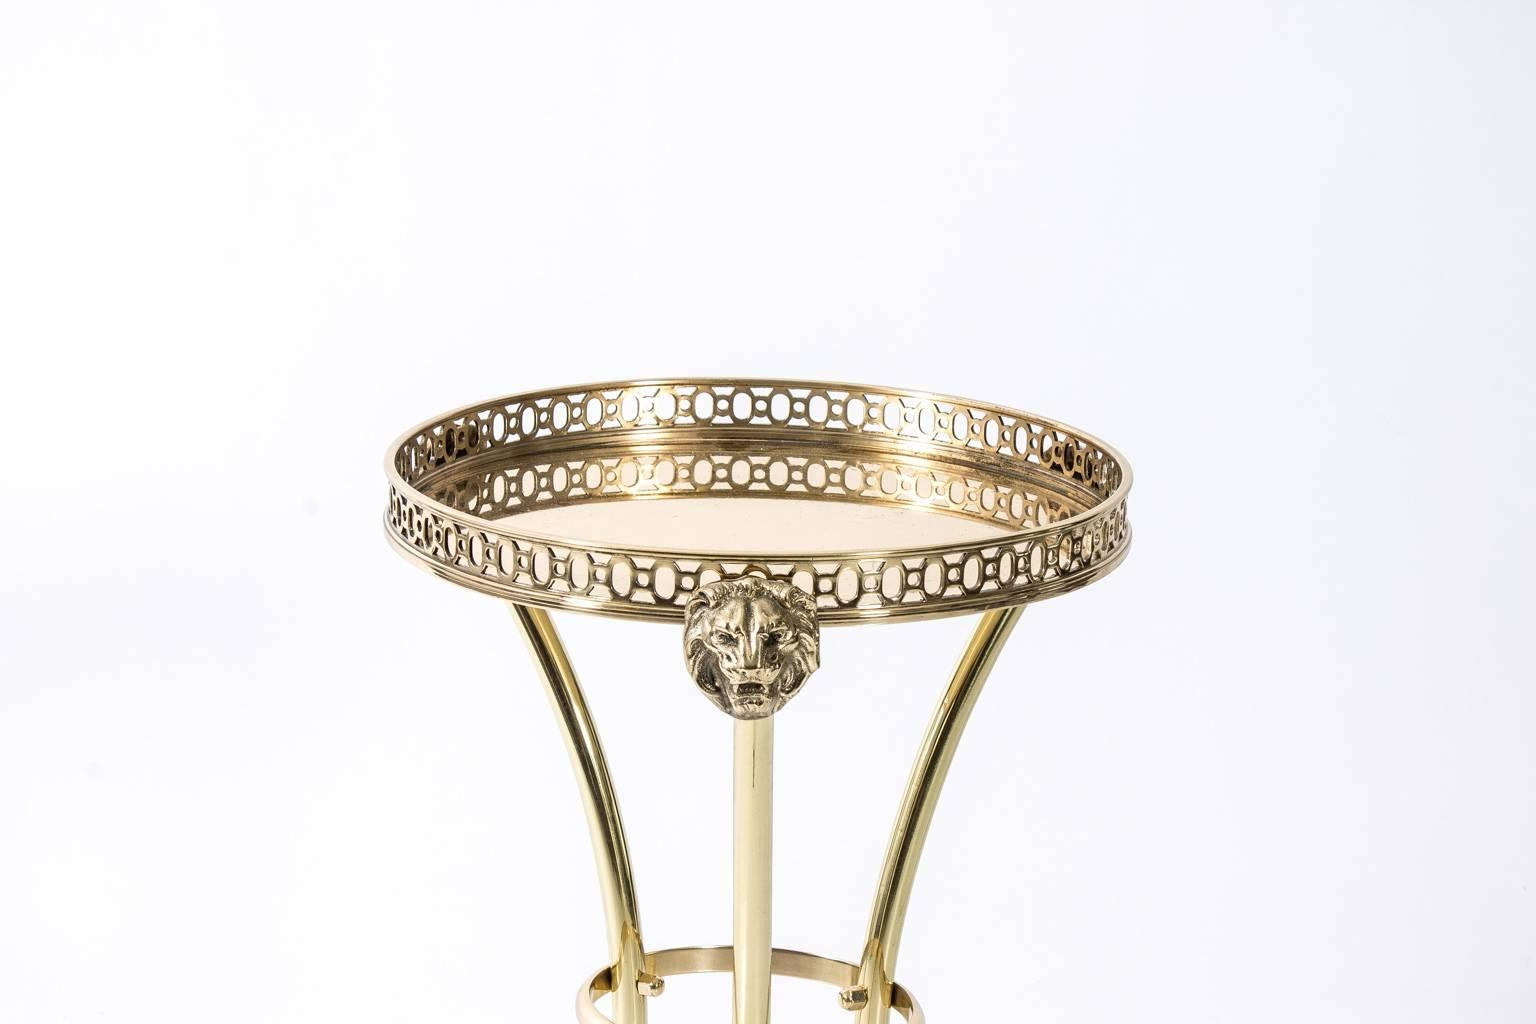 Brass lion's head drinks table with pierced gallery by Maitland-Smith.